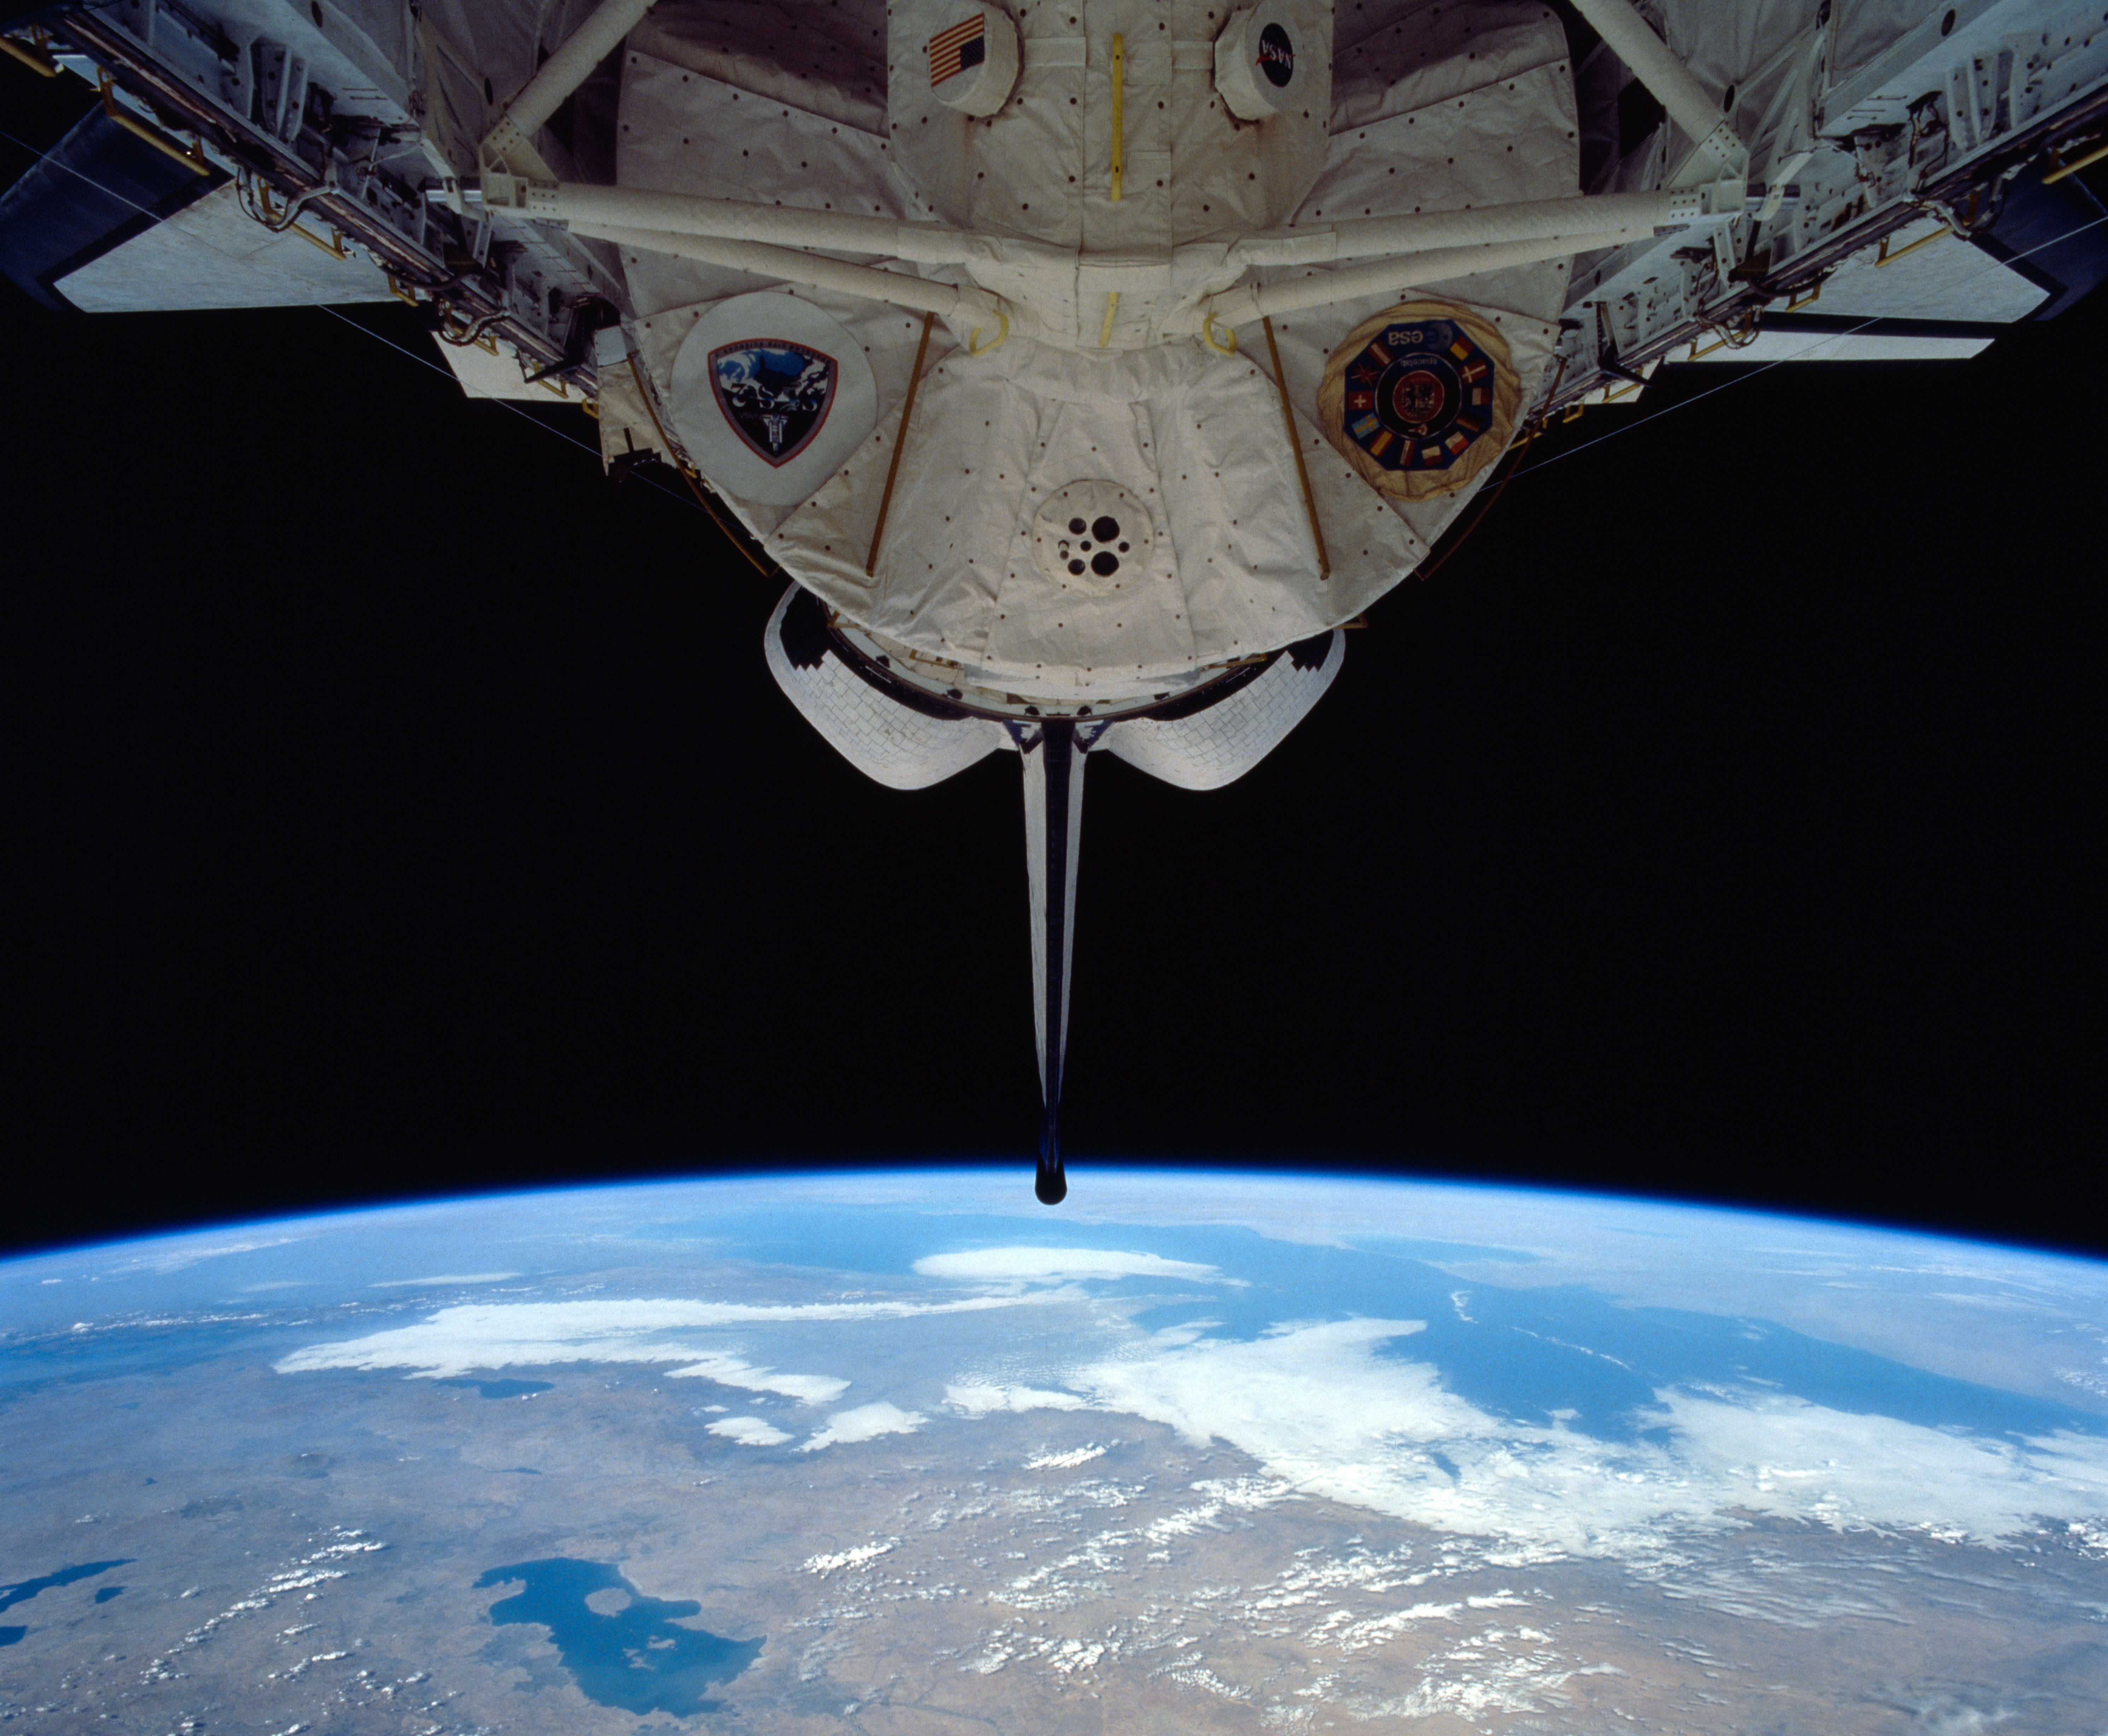 View of the Spacelab module in Columbia’s payload bay